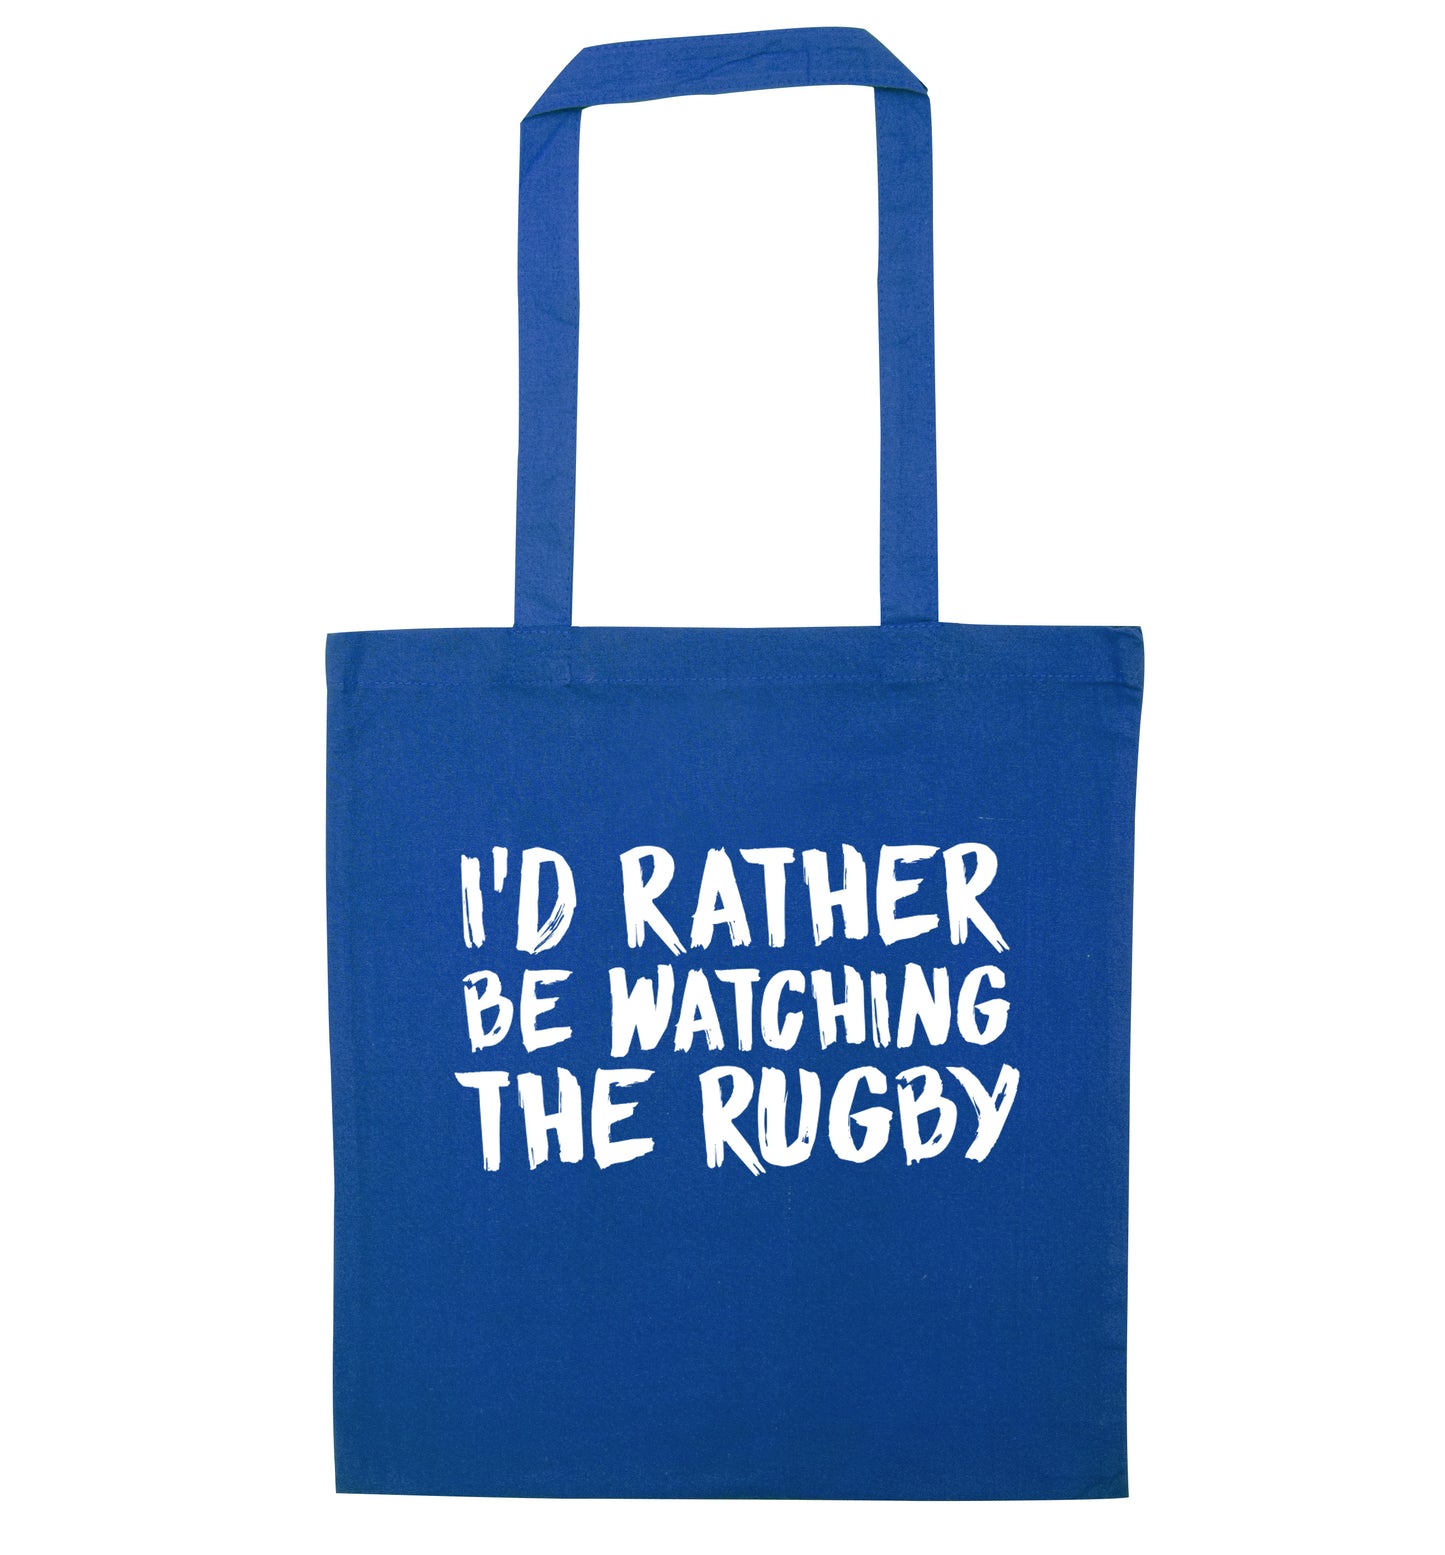 I'd rather be watching the rugby blue tote bag